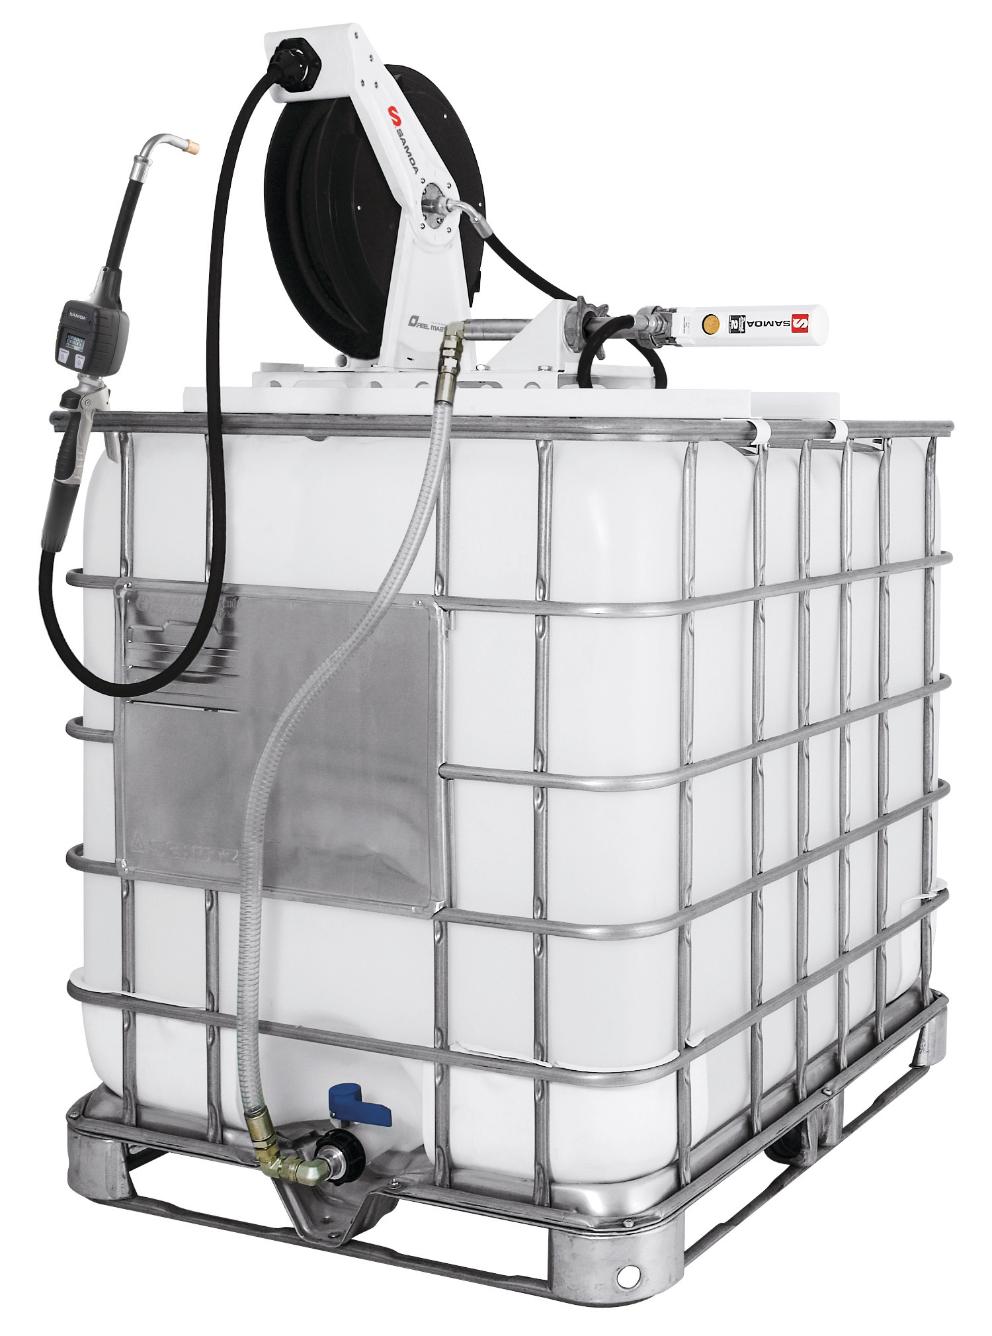 PUMPMASTER 2 - 3:1 RATIO OIL PNEUMATIC PUMP, 1.000 L IBC, TOP MOUNTED STATIONARY PACKAGE WITH RM-12S REEL